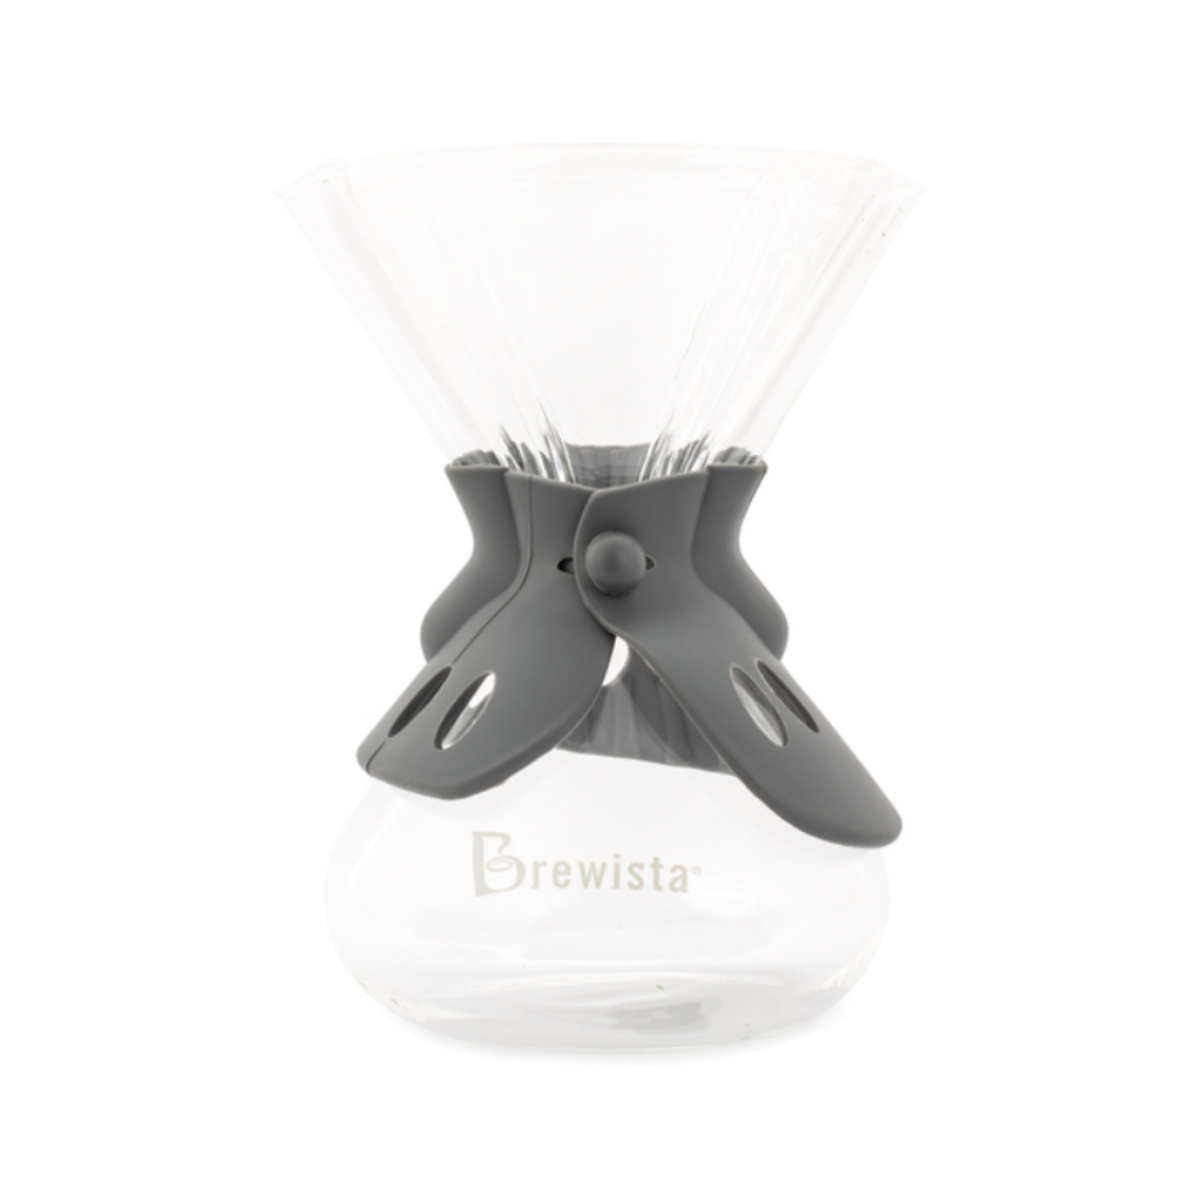 Brewista filter coffee maker - 5 cups 750ml - Pour over